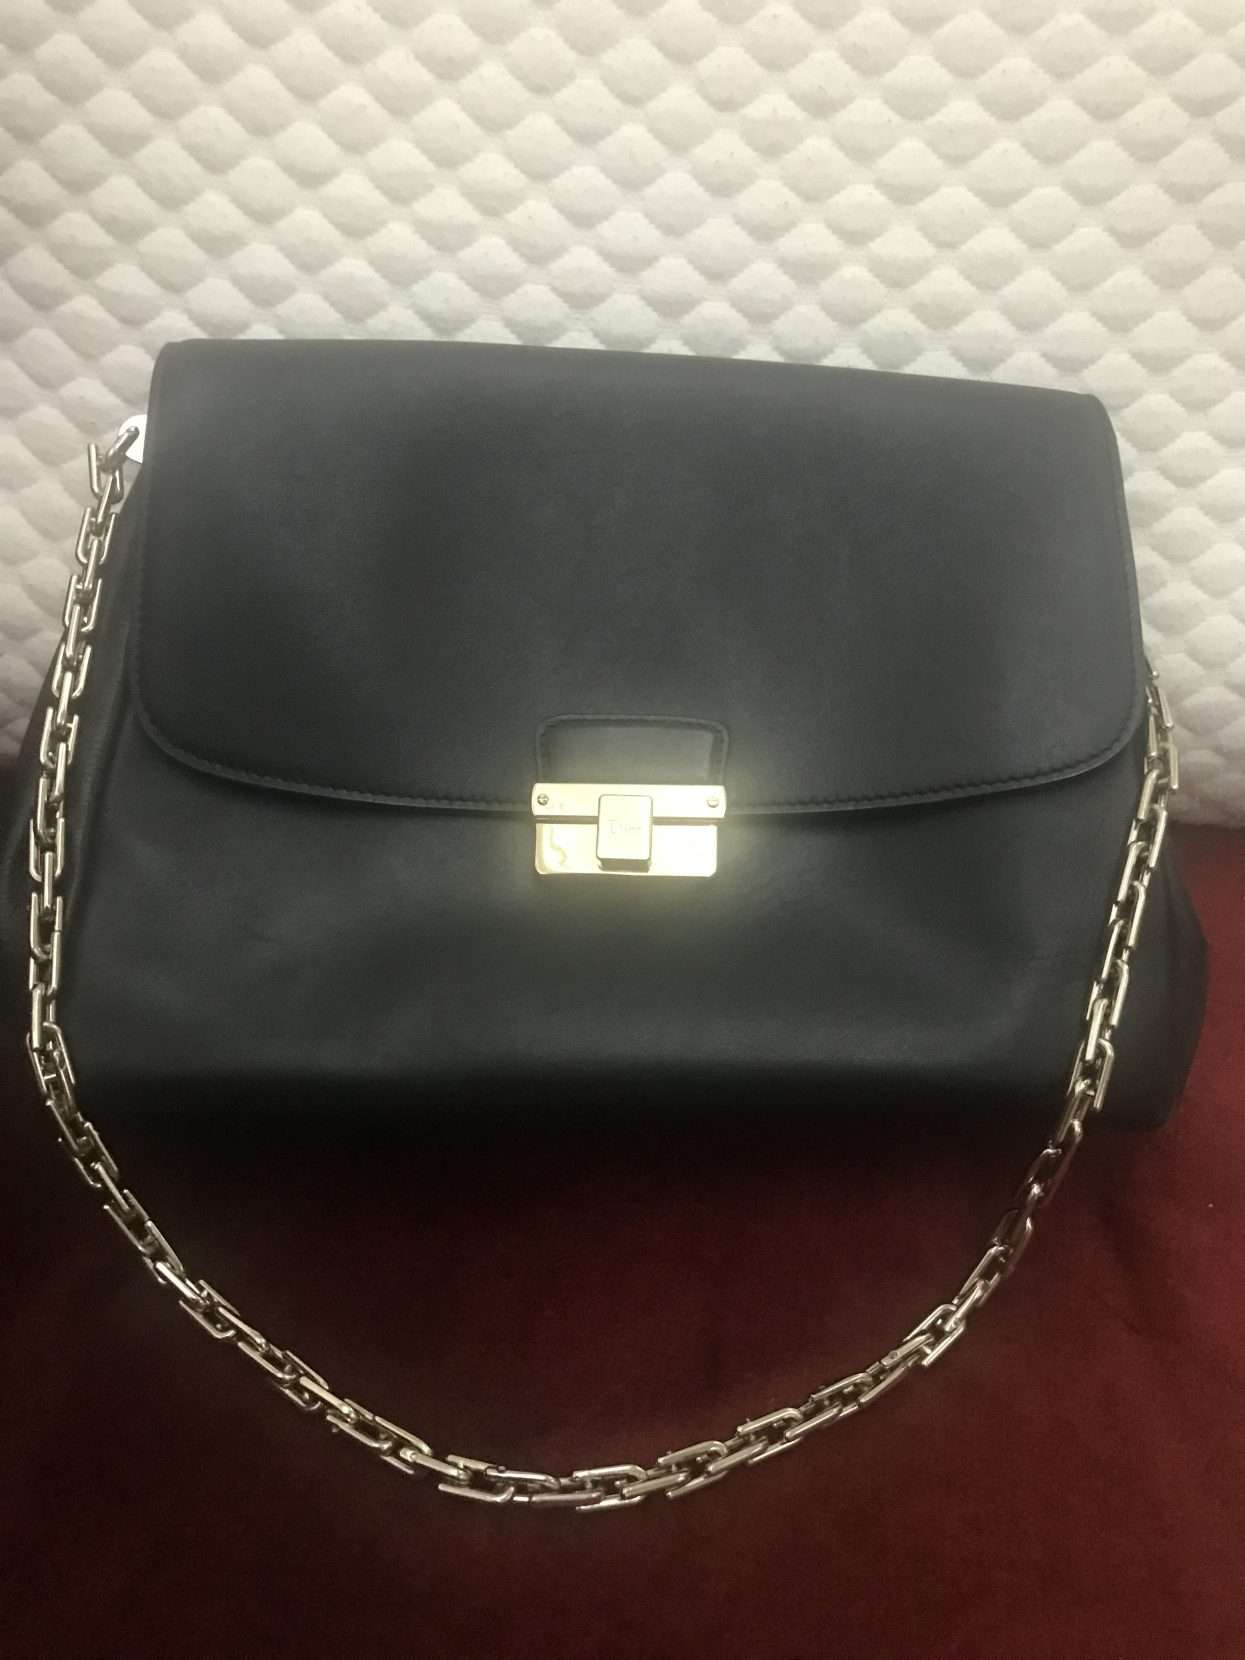 Preloved Classic Christian Dior Bag for Sale